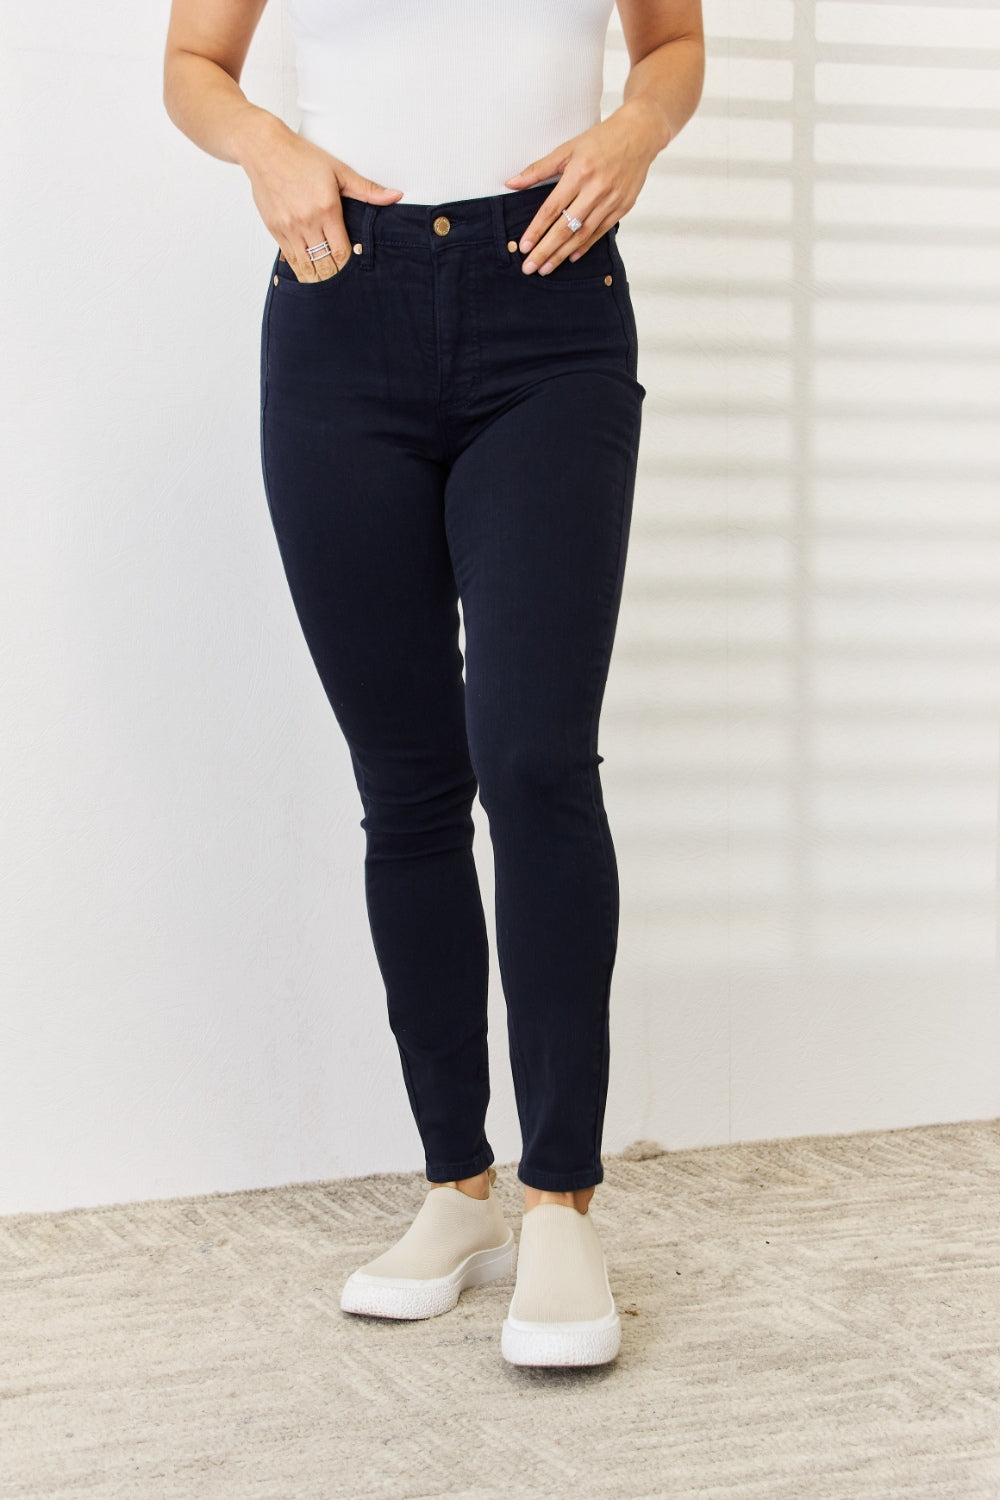 Judy Blue High-Rise Tummy Control Skinny Jeans NAVY